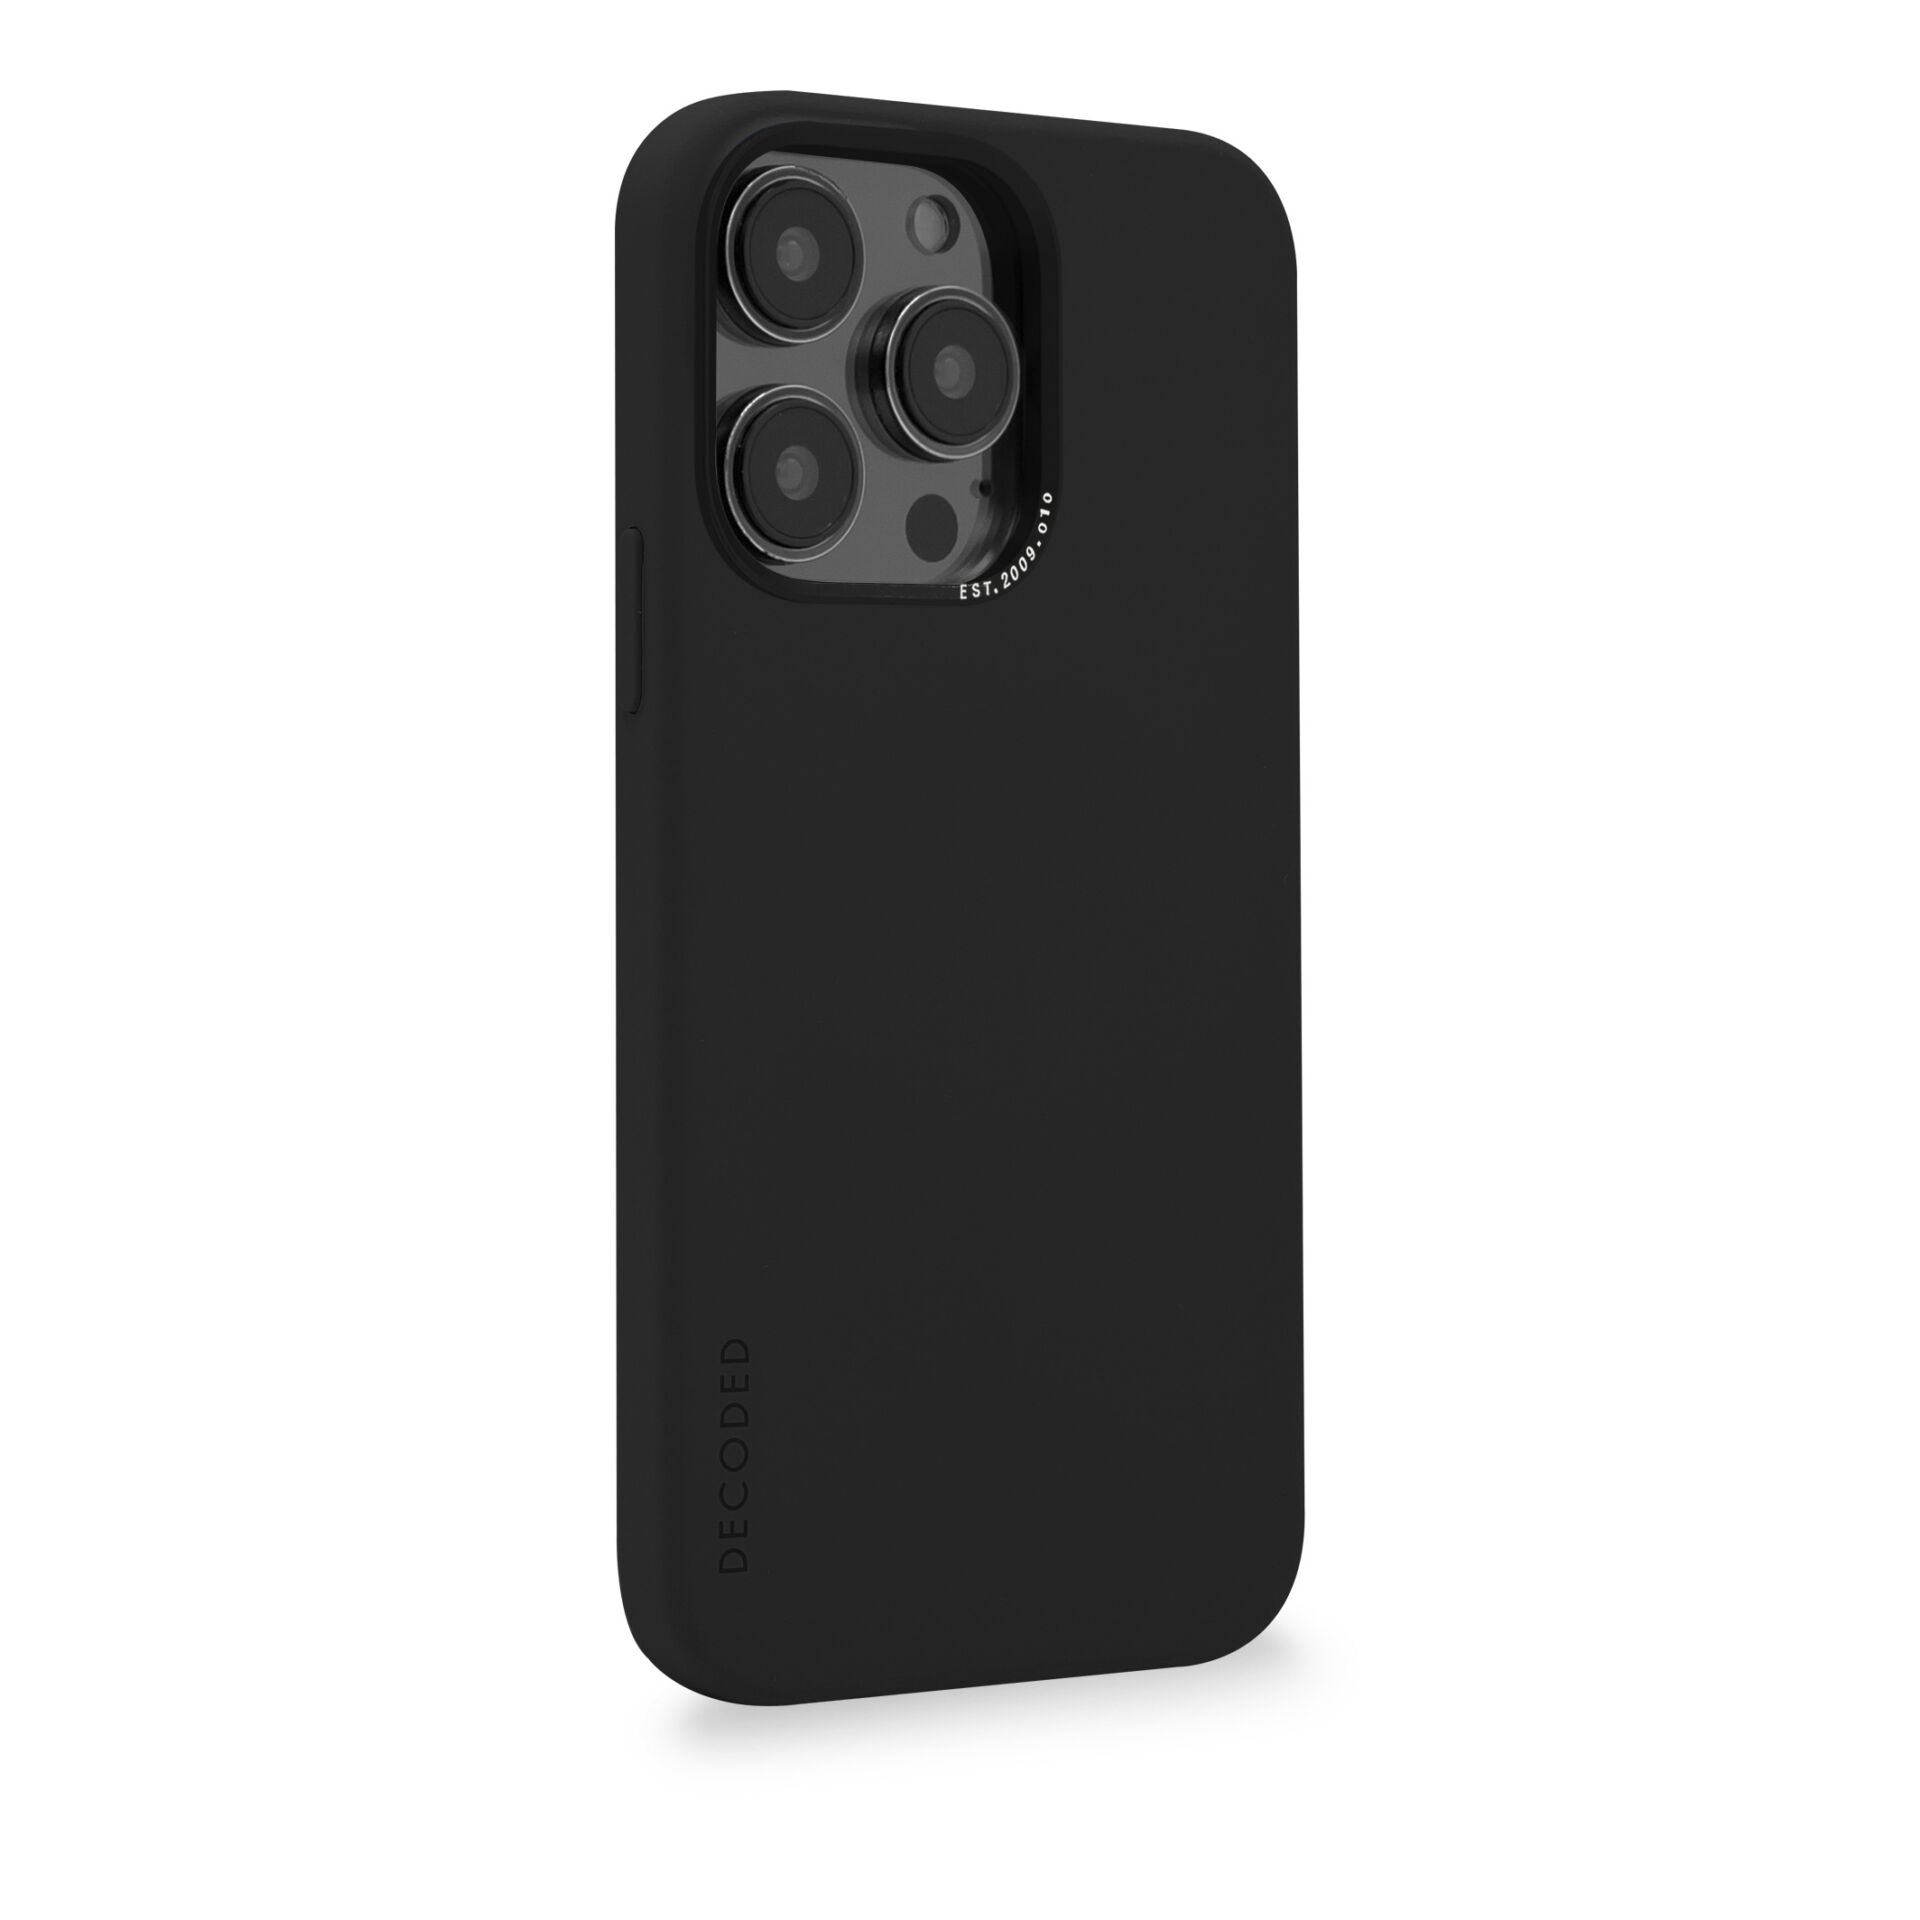 Charcoal Backcover, Charcoal, Silicone AntiMicrobial Apple, iPhone Backcover DECODED Pro, 14